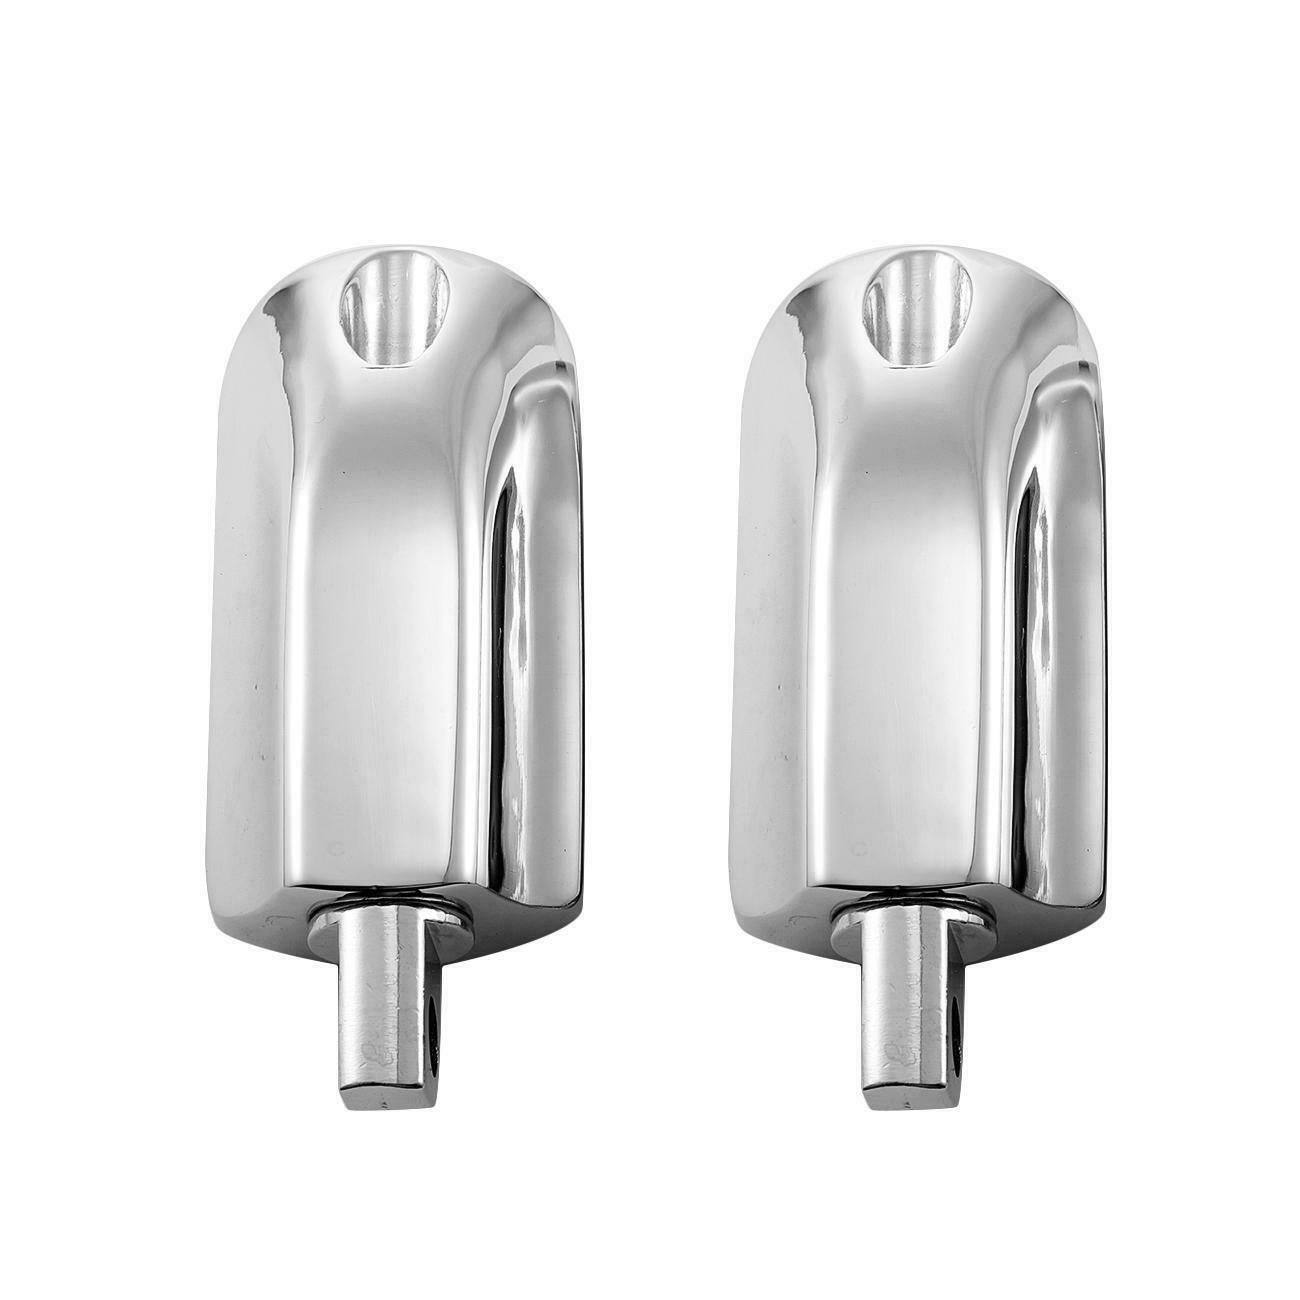 For Harley Davidson Dyna Street Glide 1-1/4" 32mm Chrome Highway Foot Pegs Rests - Moto Life Products